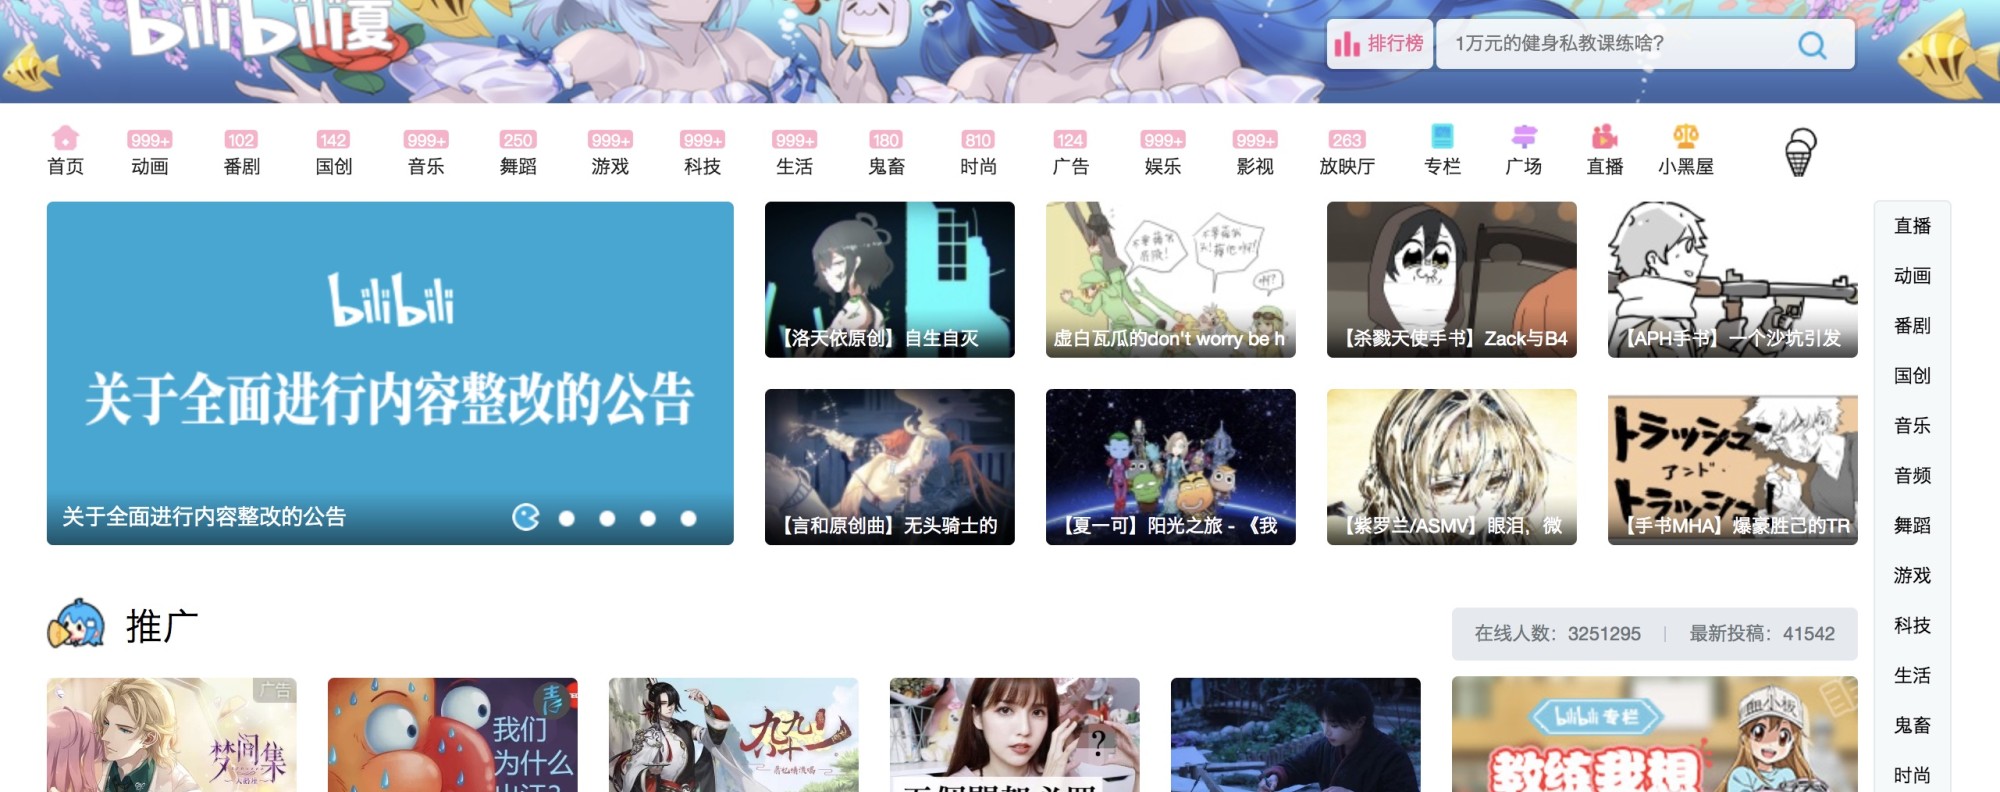 Bilibili Is Now Officially Available In Malaysia | TAV